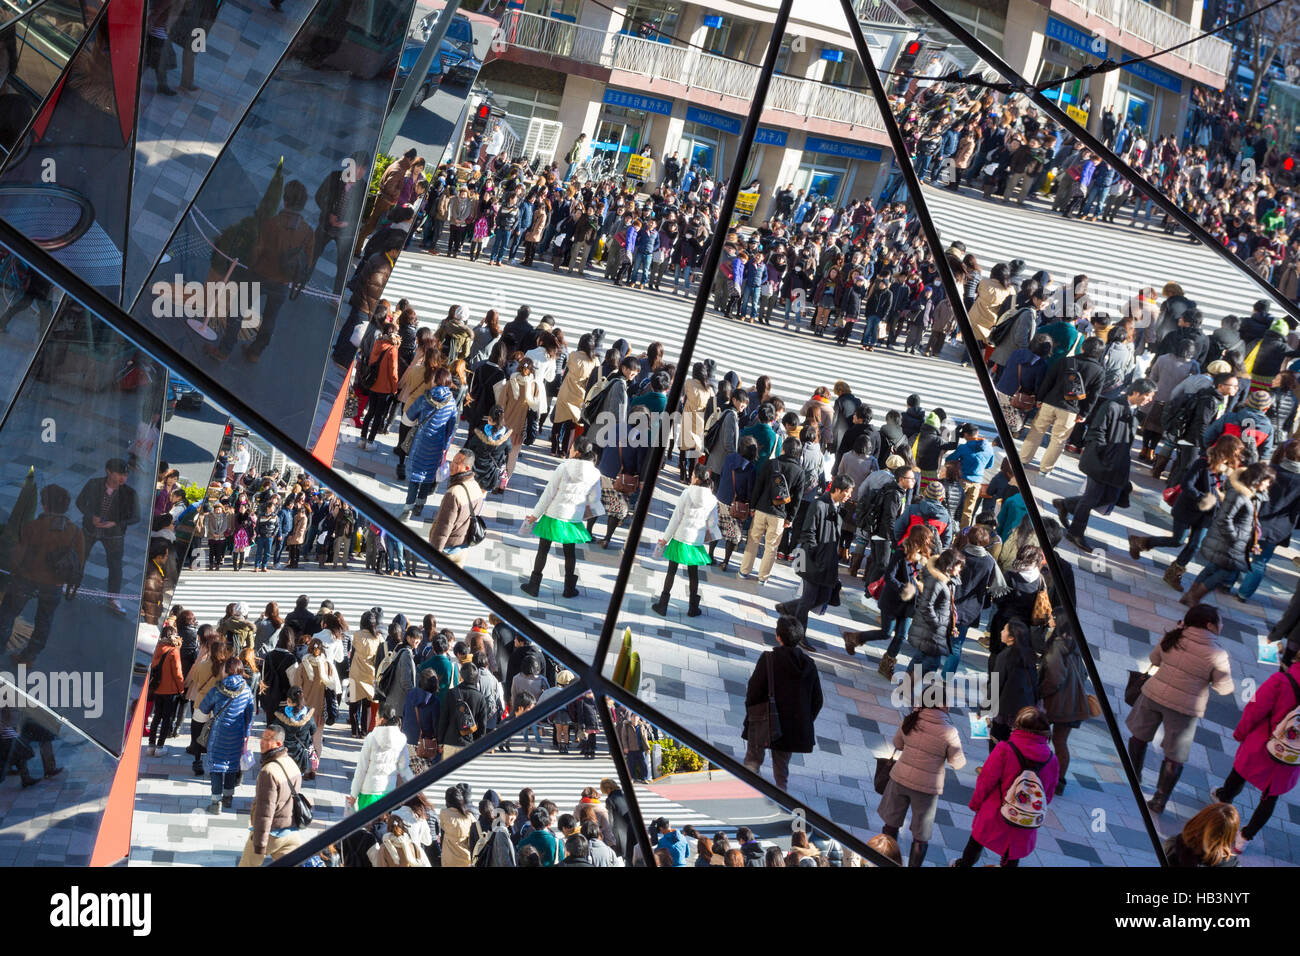 Reflection of the crowd into mirrors in Tokyo, Japan Stock Photo